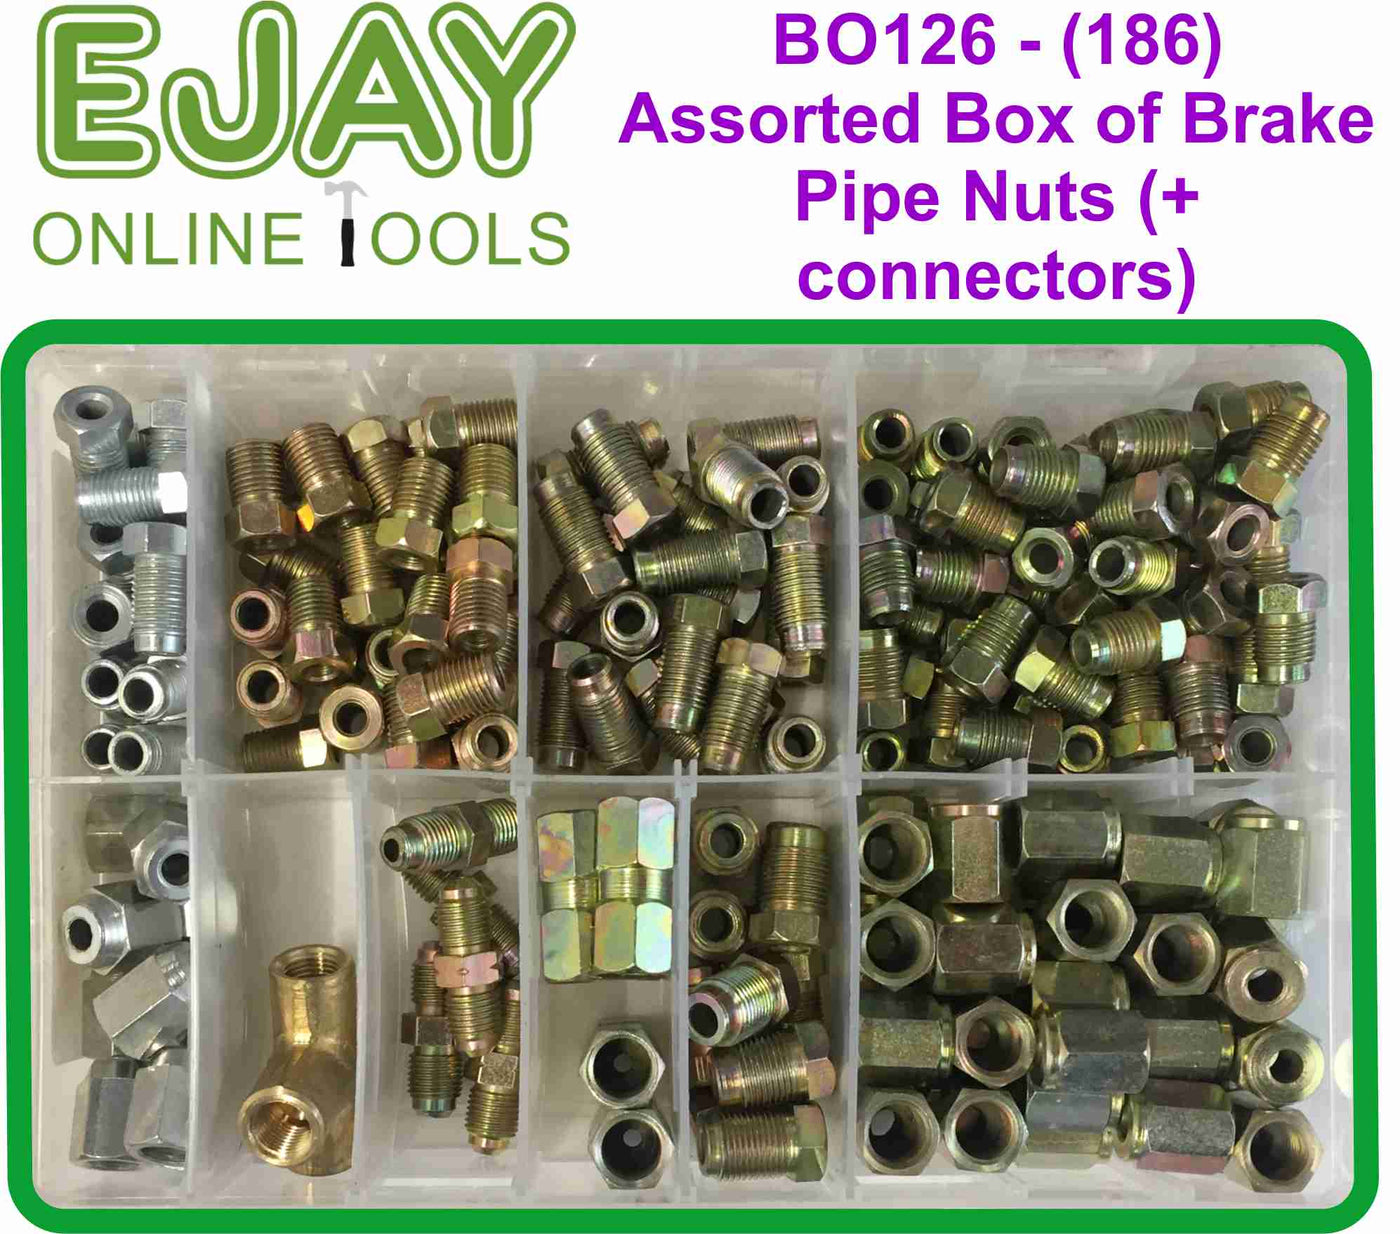 Assorted Box of 186 Assorted Brake Pipe Nuts and Connectors